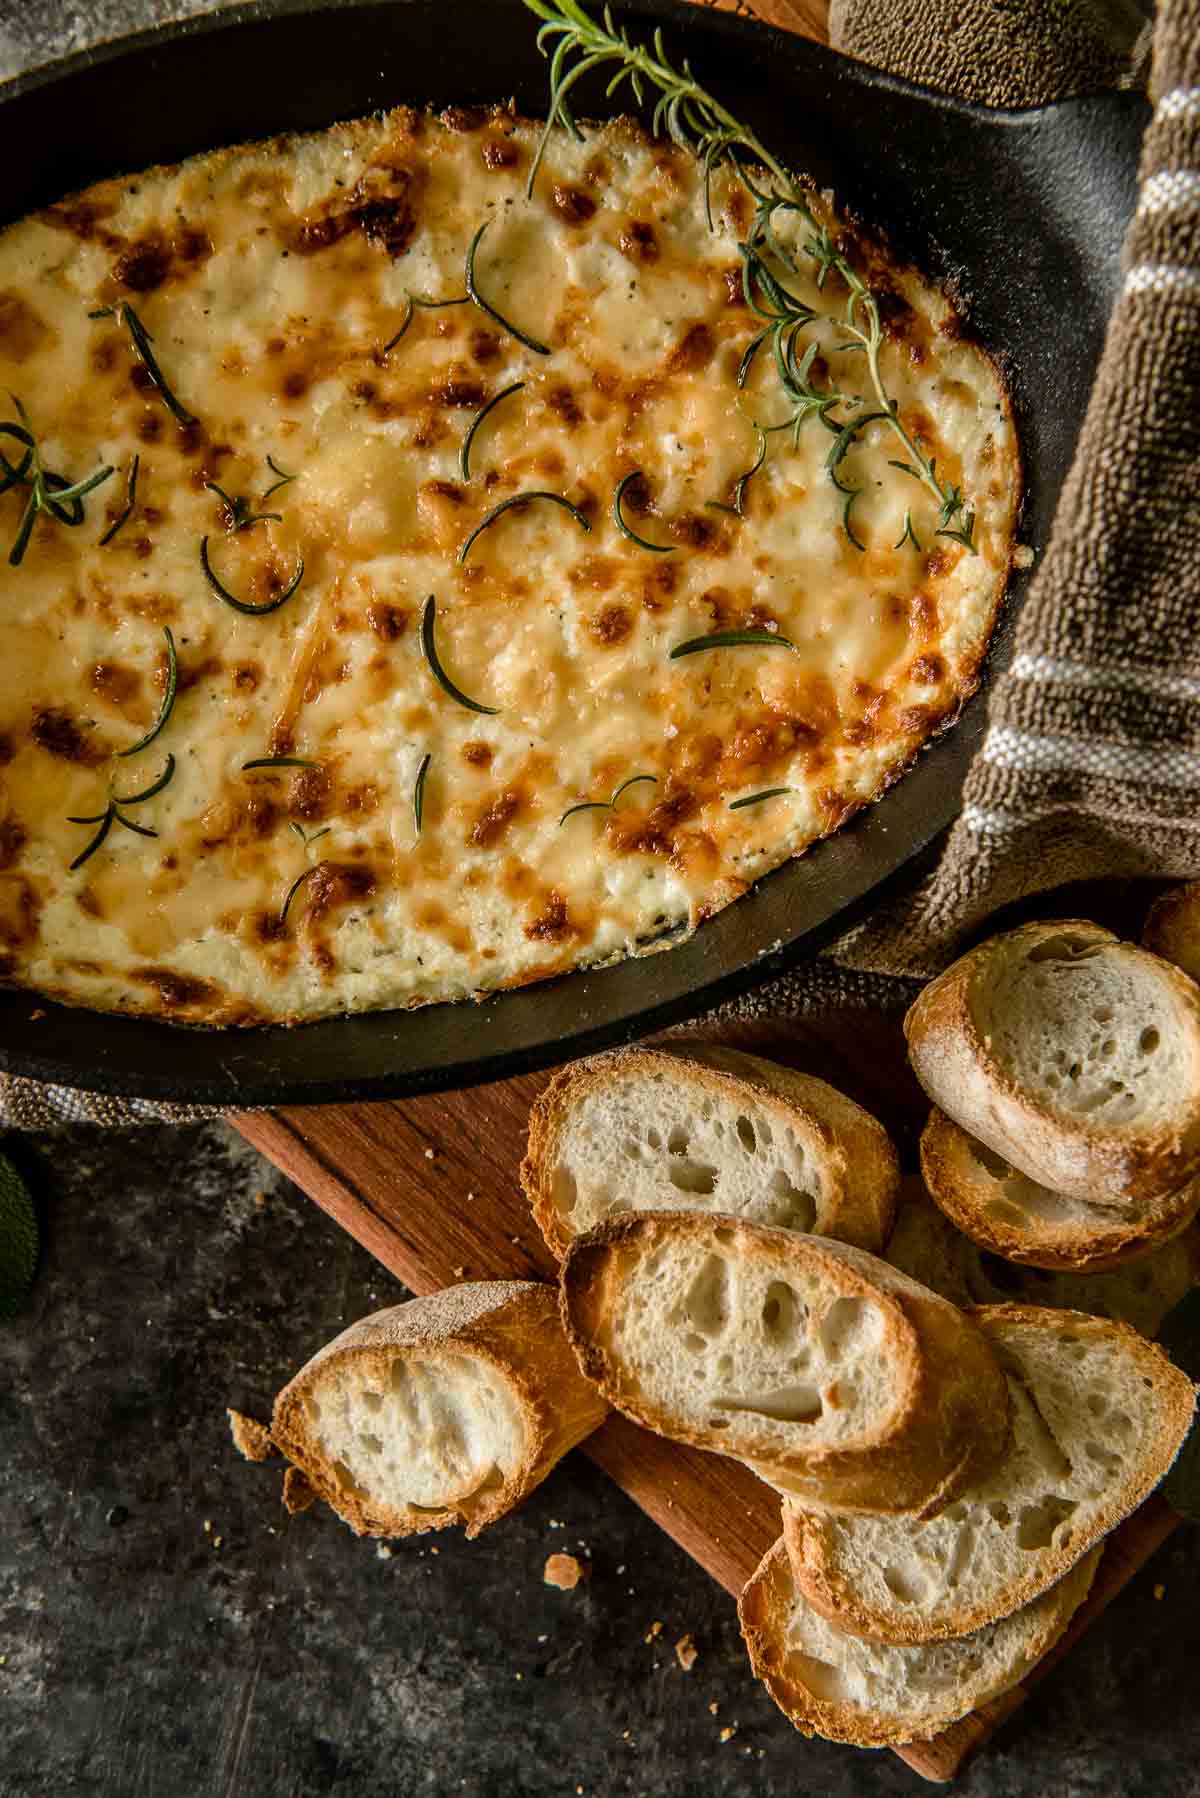 Warm, salty, and extra cheesy, this Baked Ricotta Dip is a delicious appetizer for any occasion. Serve it with slices of your favorite toasted bread and you'll find it hard to stop eating!